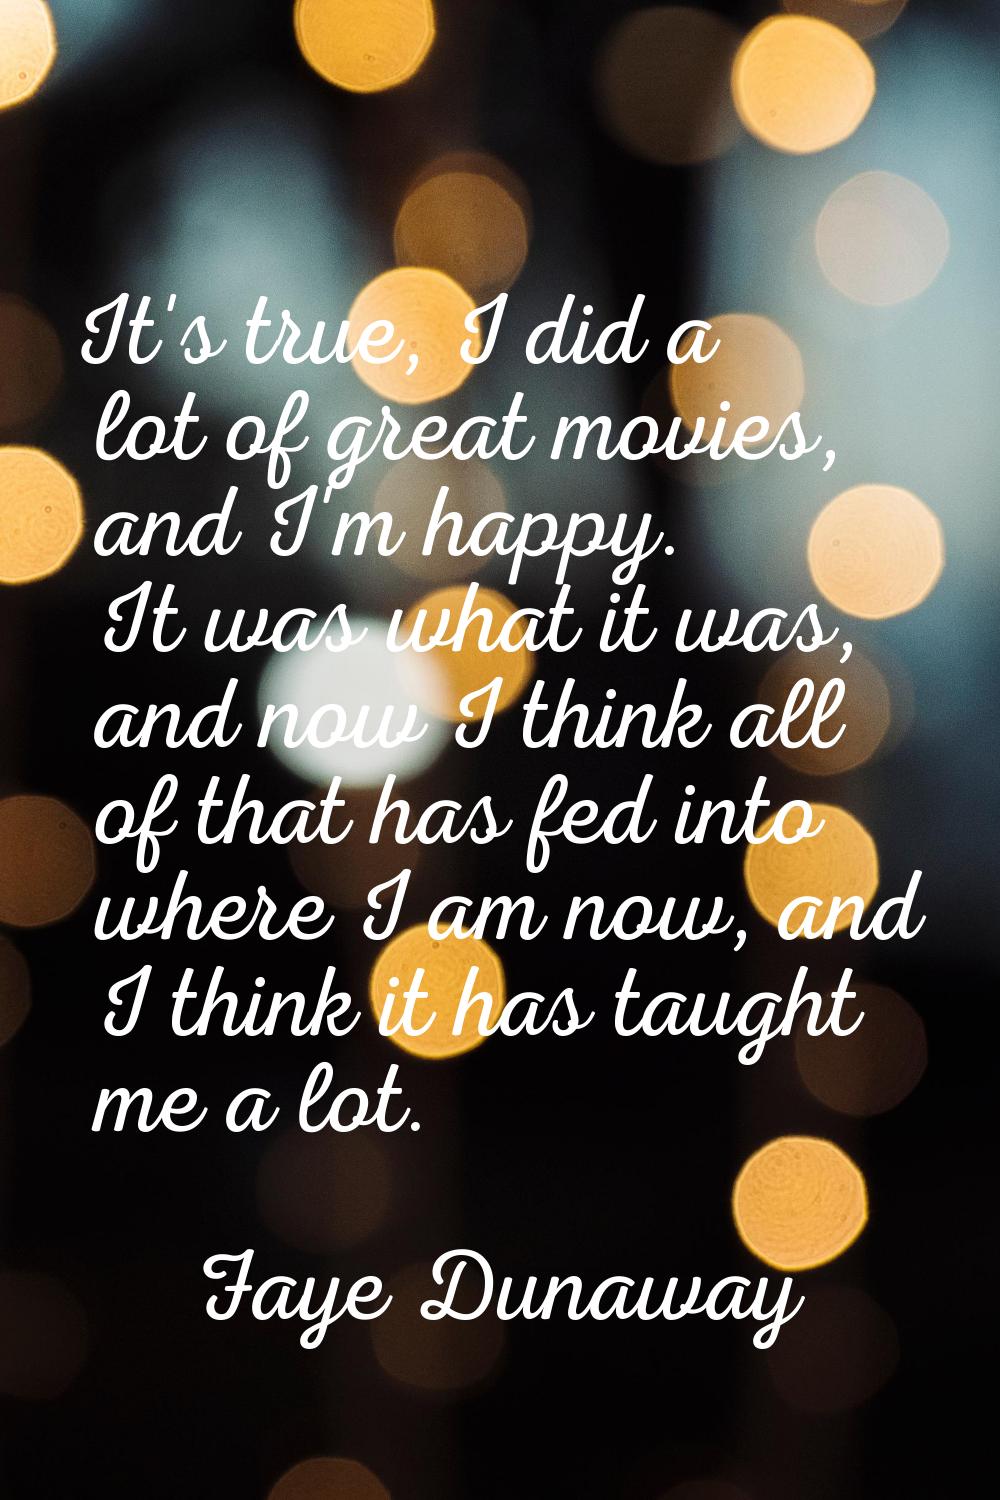 It's true, I did a lot of great movies, and I'm happy. It was what it was, and now I think all of t